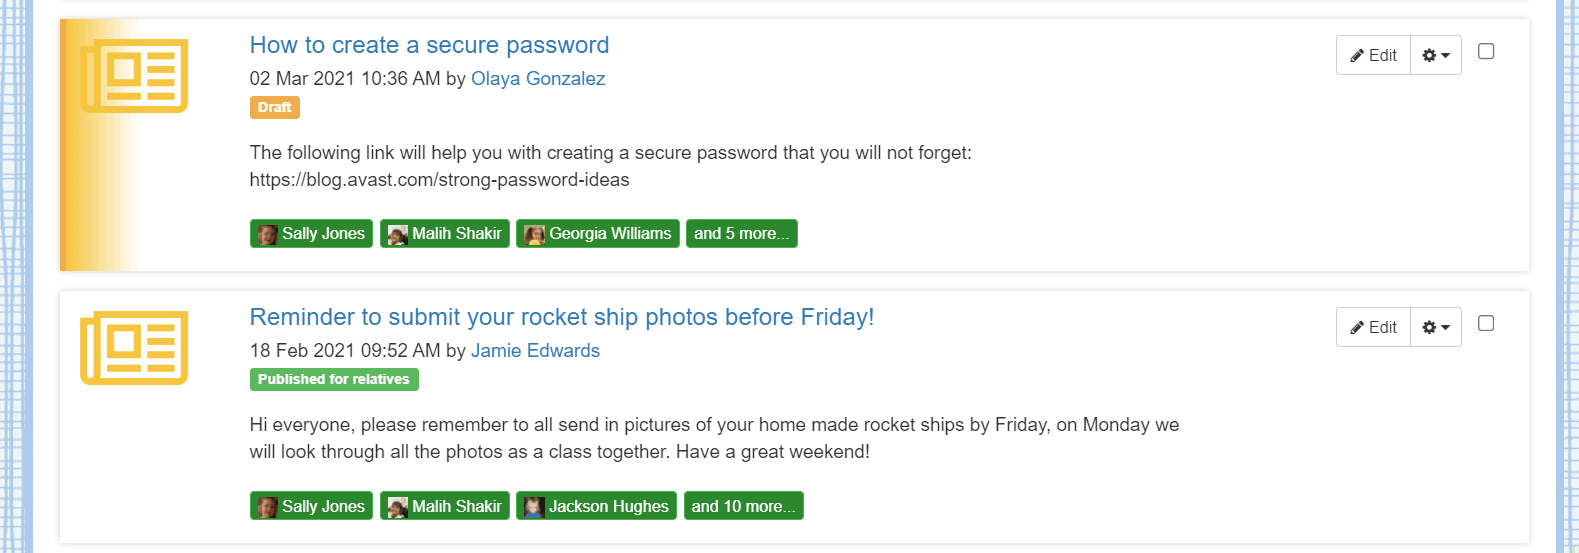 Two examples of a memo. One linking to a site which helps you to set secure passwords, and one reminder to submit rocket ship photos before the deadline. 